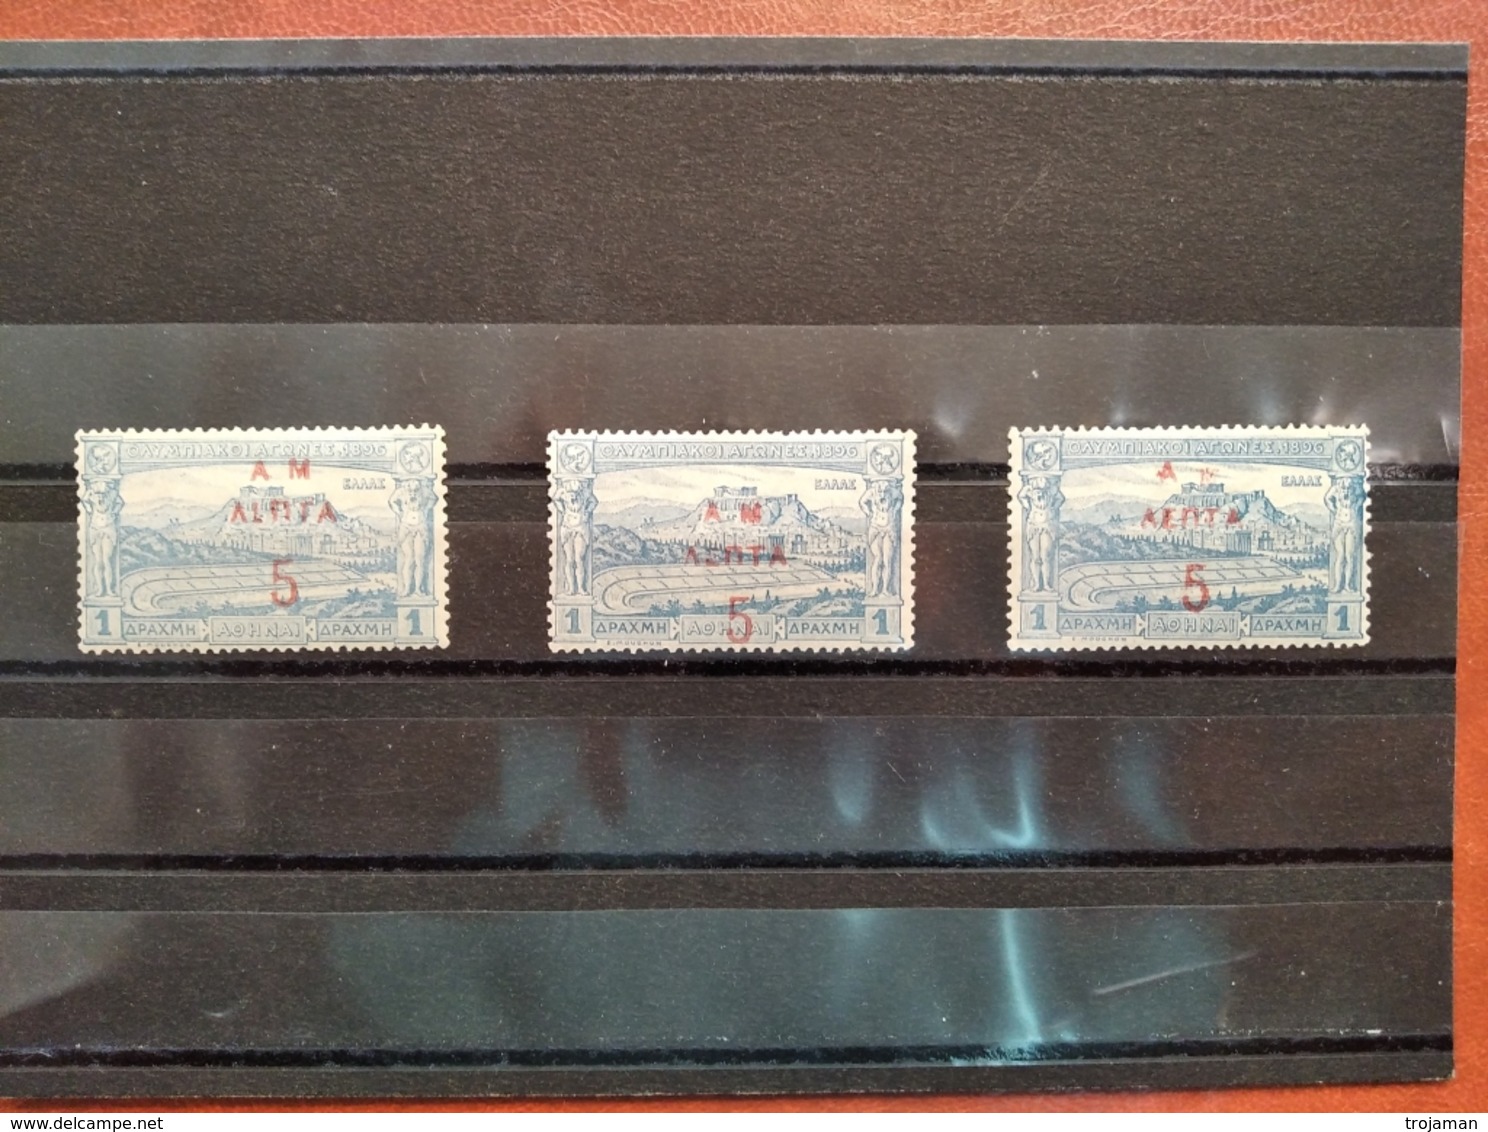 EX -03-20-14 3 STAMPS WITH THE DIFF PROBLEMS OF OVERPRINT.  MH *. CAT. HERMES MINIMUM 300 EURO. - Ete 1896: Athènes